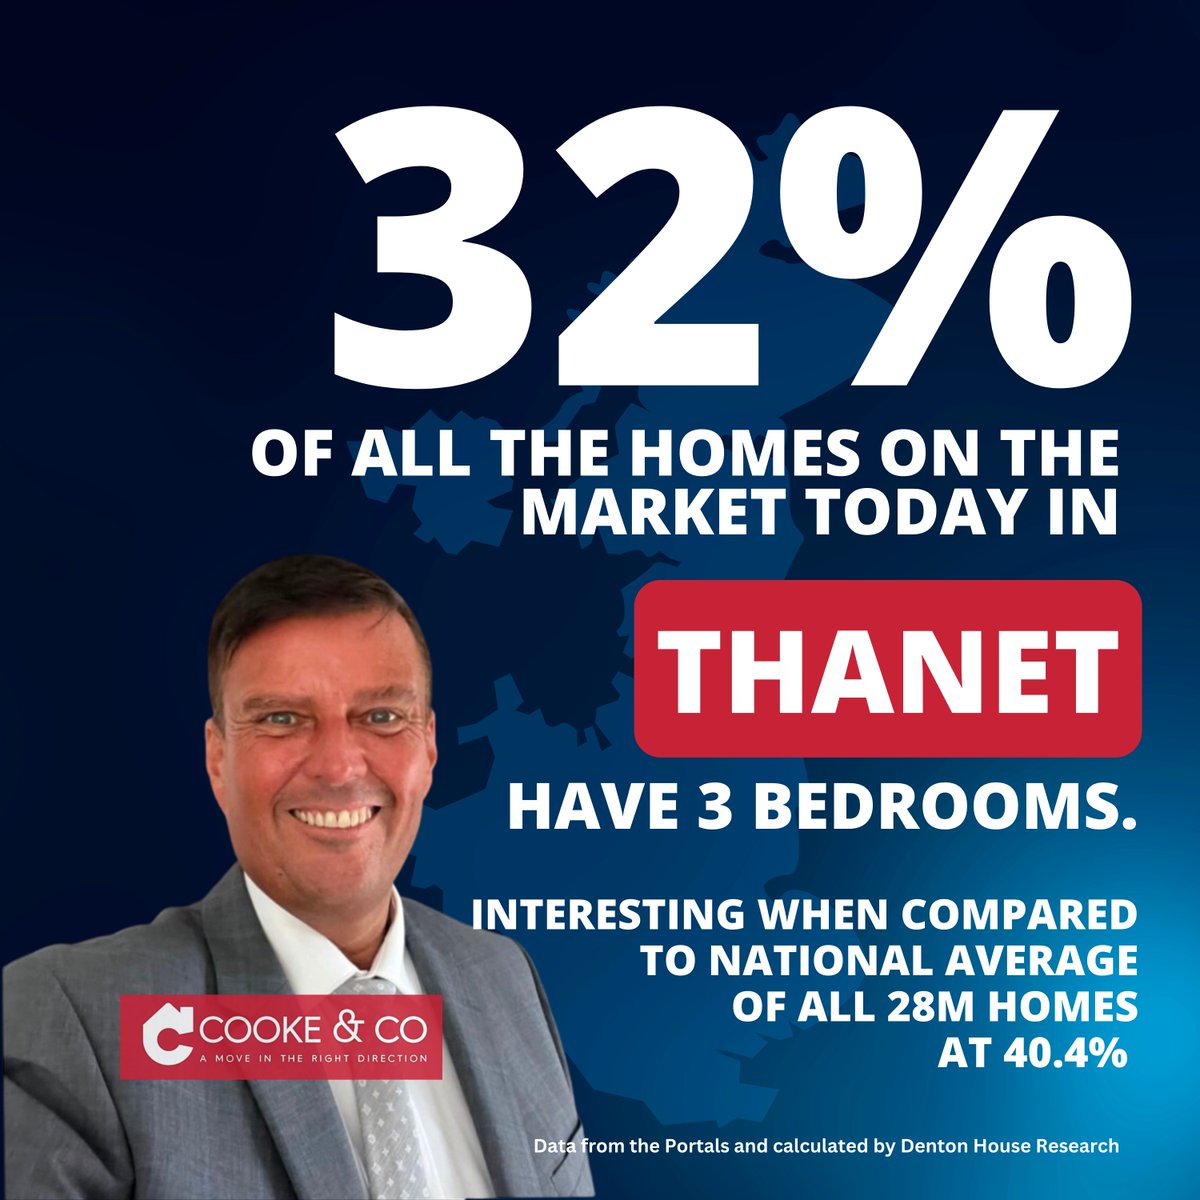 🏡 Find your dream 3-bedroom home in Ramsgate, Kent! 🏡
Did you know? 40.4% of homes nationally have three bedrooms. What about Ramsgate?
👇 Learn more 👇
bit.ly/3zlgUAX 
#ThreeBedroomHomes #RamsgateKent